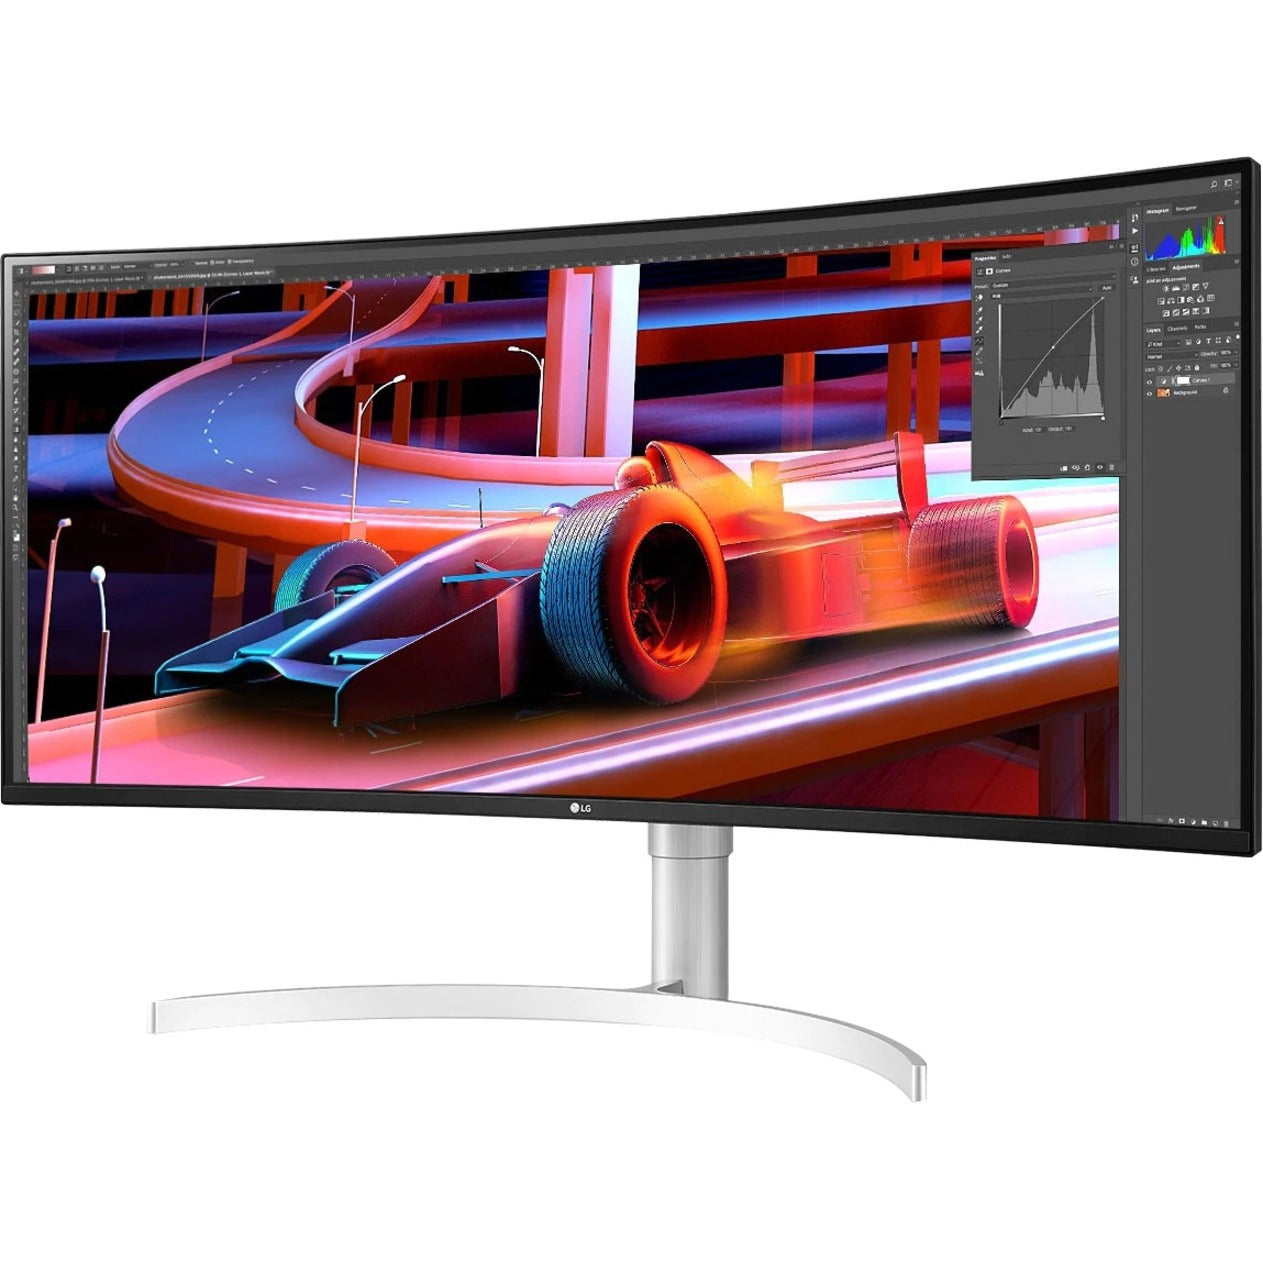 LG Ultrawide 38BN95C-W 38" UW-QHD+ Curved Screen Gaming LCD Monitor - 21:9 - Textured Black Textured White Silver